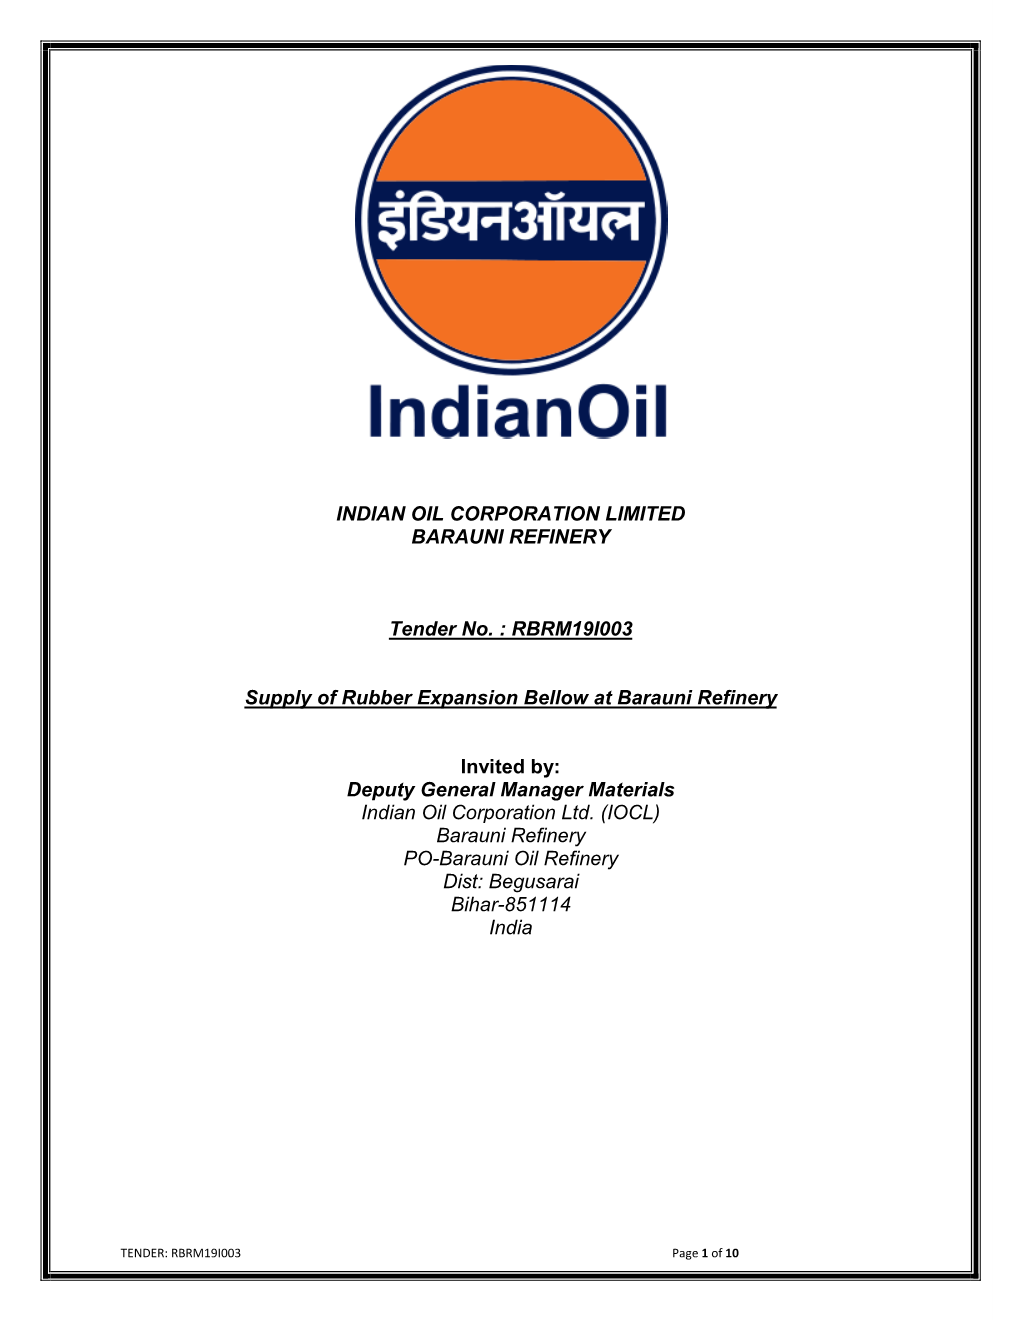 Indian Oil Corporation Limited Barauni Refinery